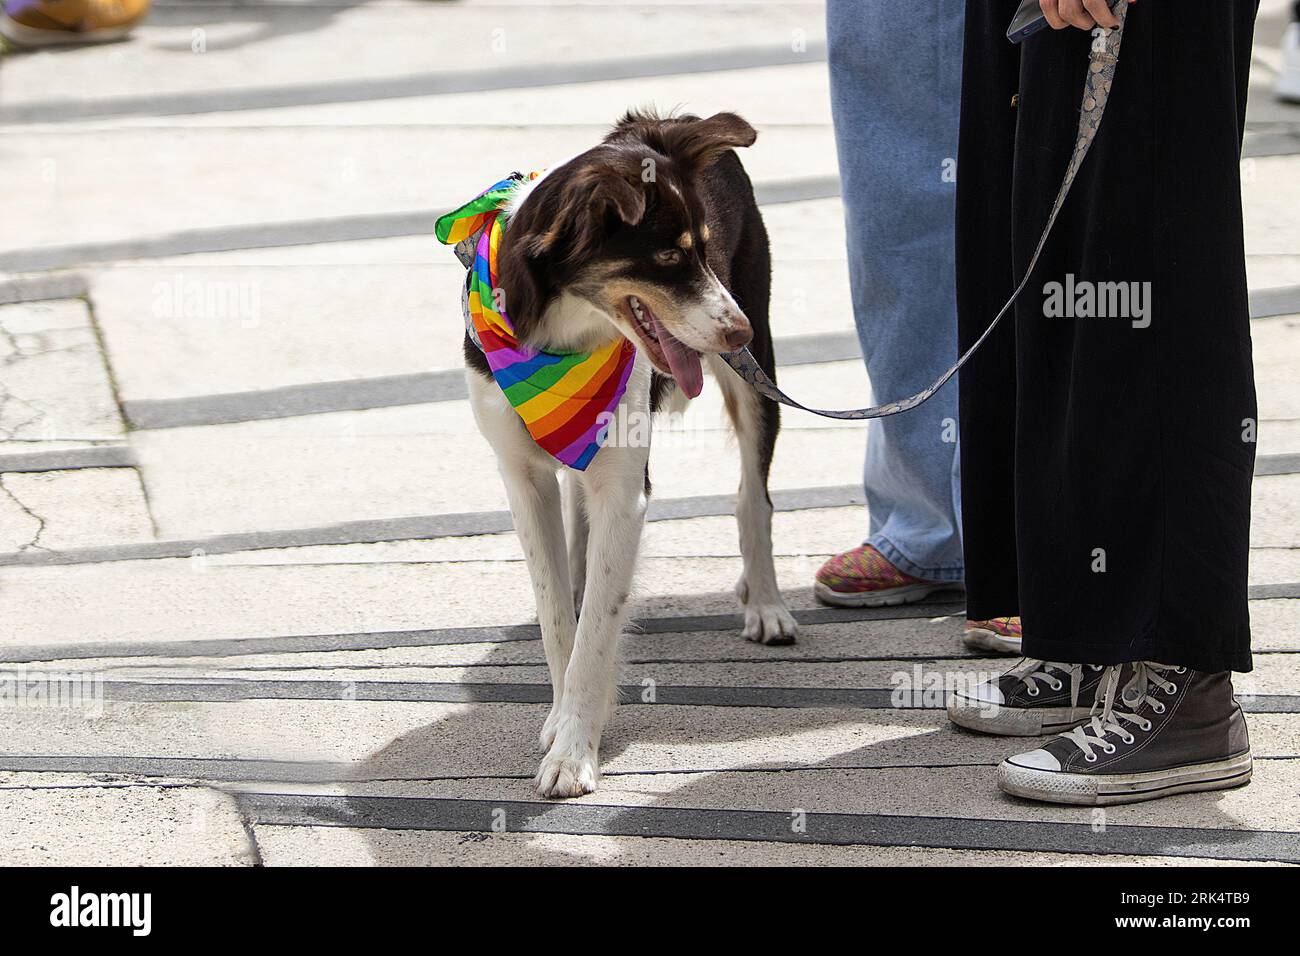 A brown and white canine stands on the sidewalk with an LGBTQ rainbow bandana on its neck Stock Photo